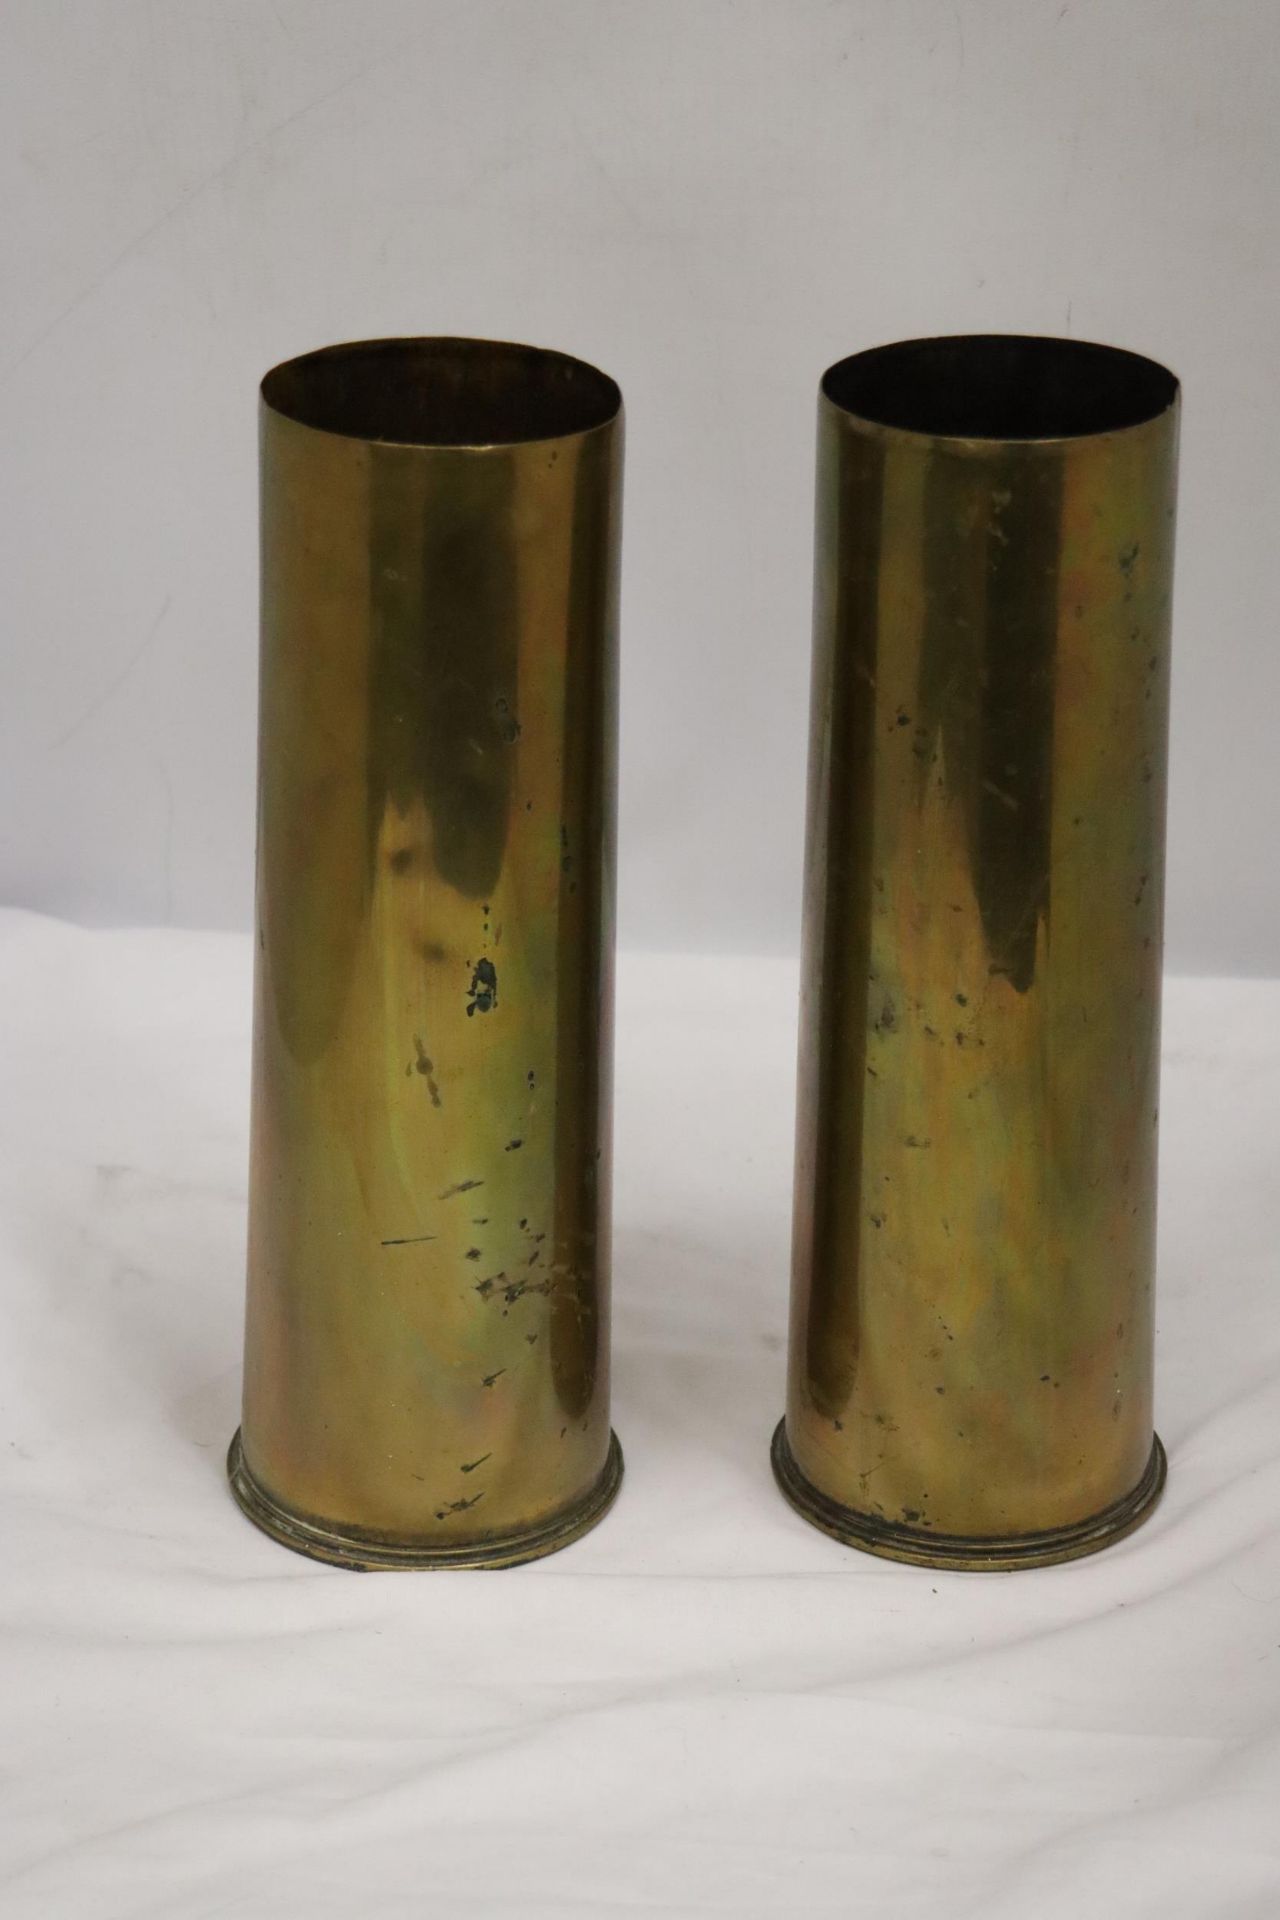 TWO BRASS TRENCH ART SHELL VASES HEIGHT 29CM - Image 2 of 3